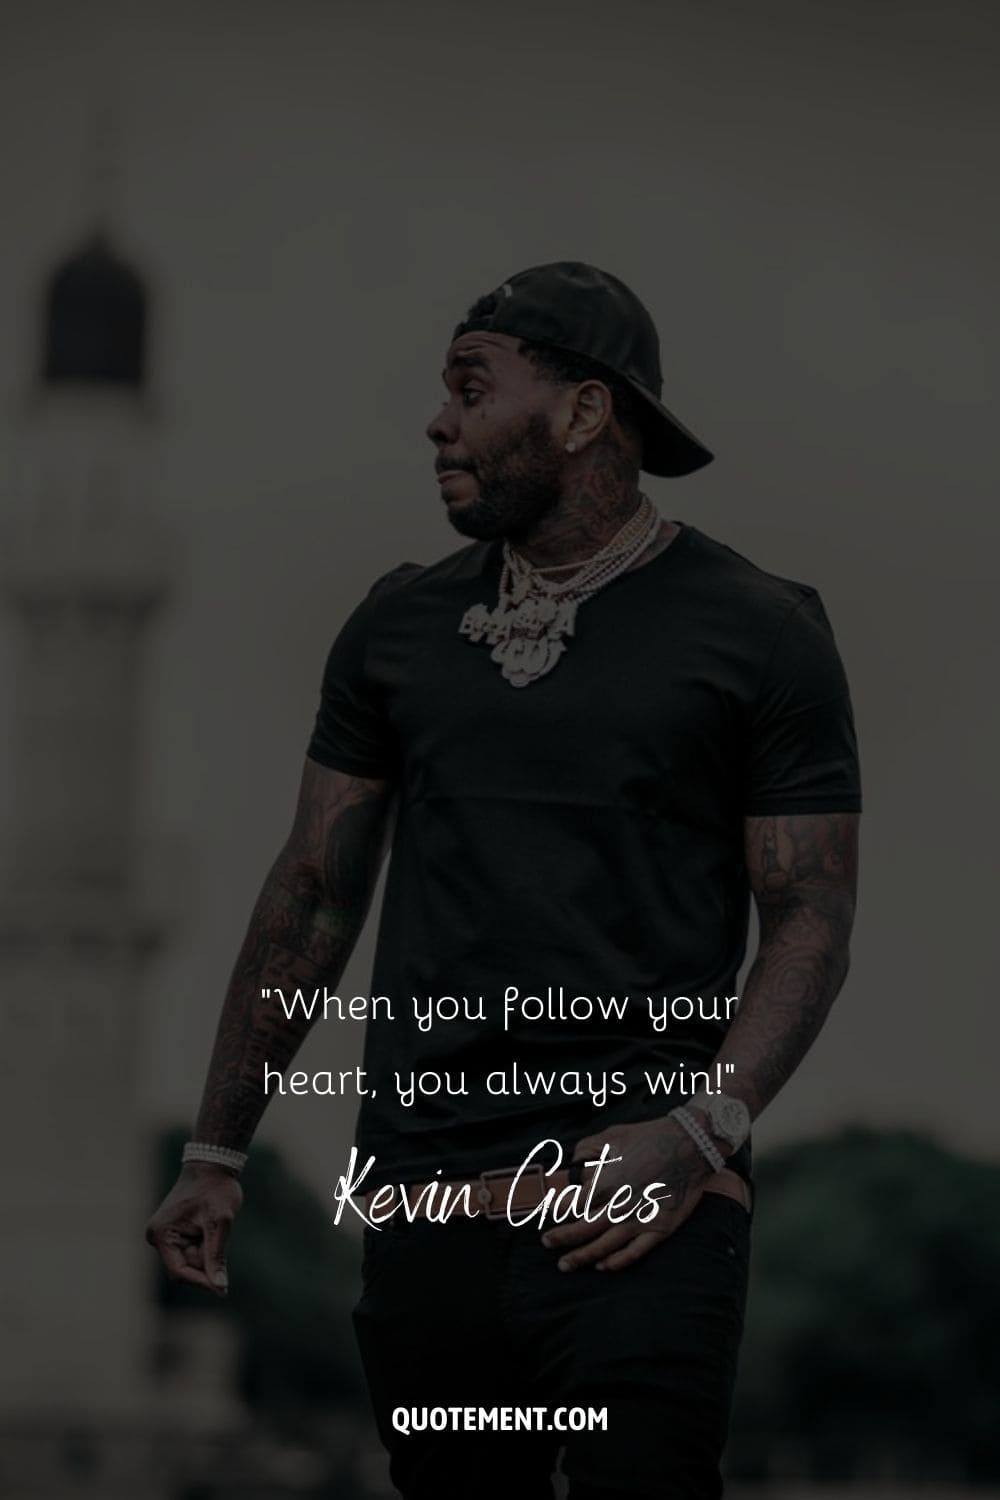 “When you follow your heart, you always win!” – Kevin Gates